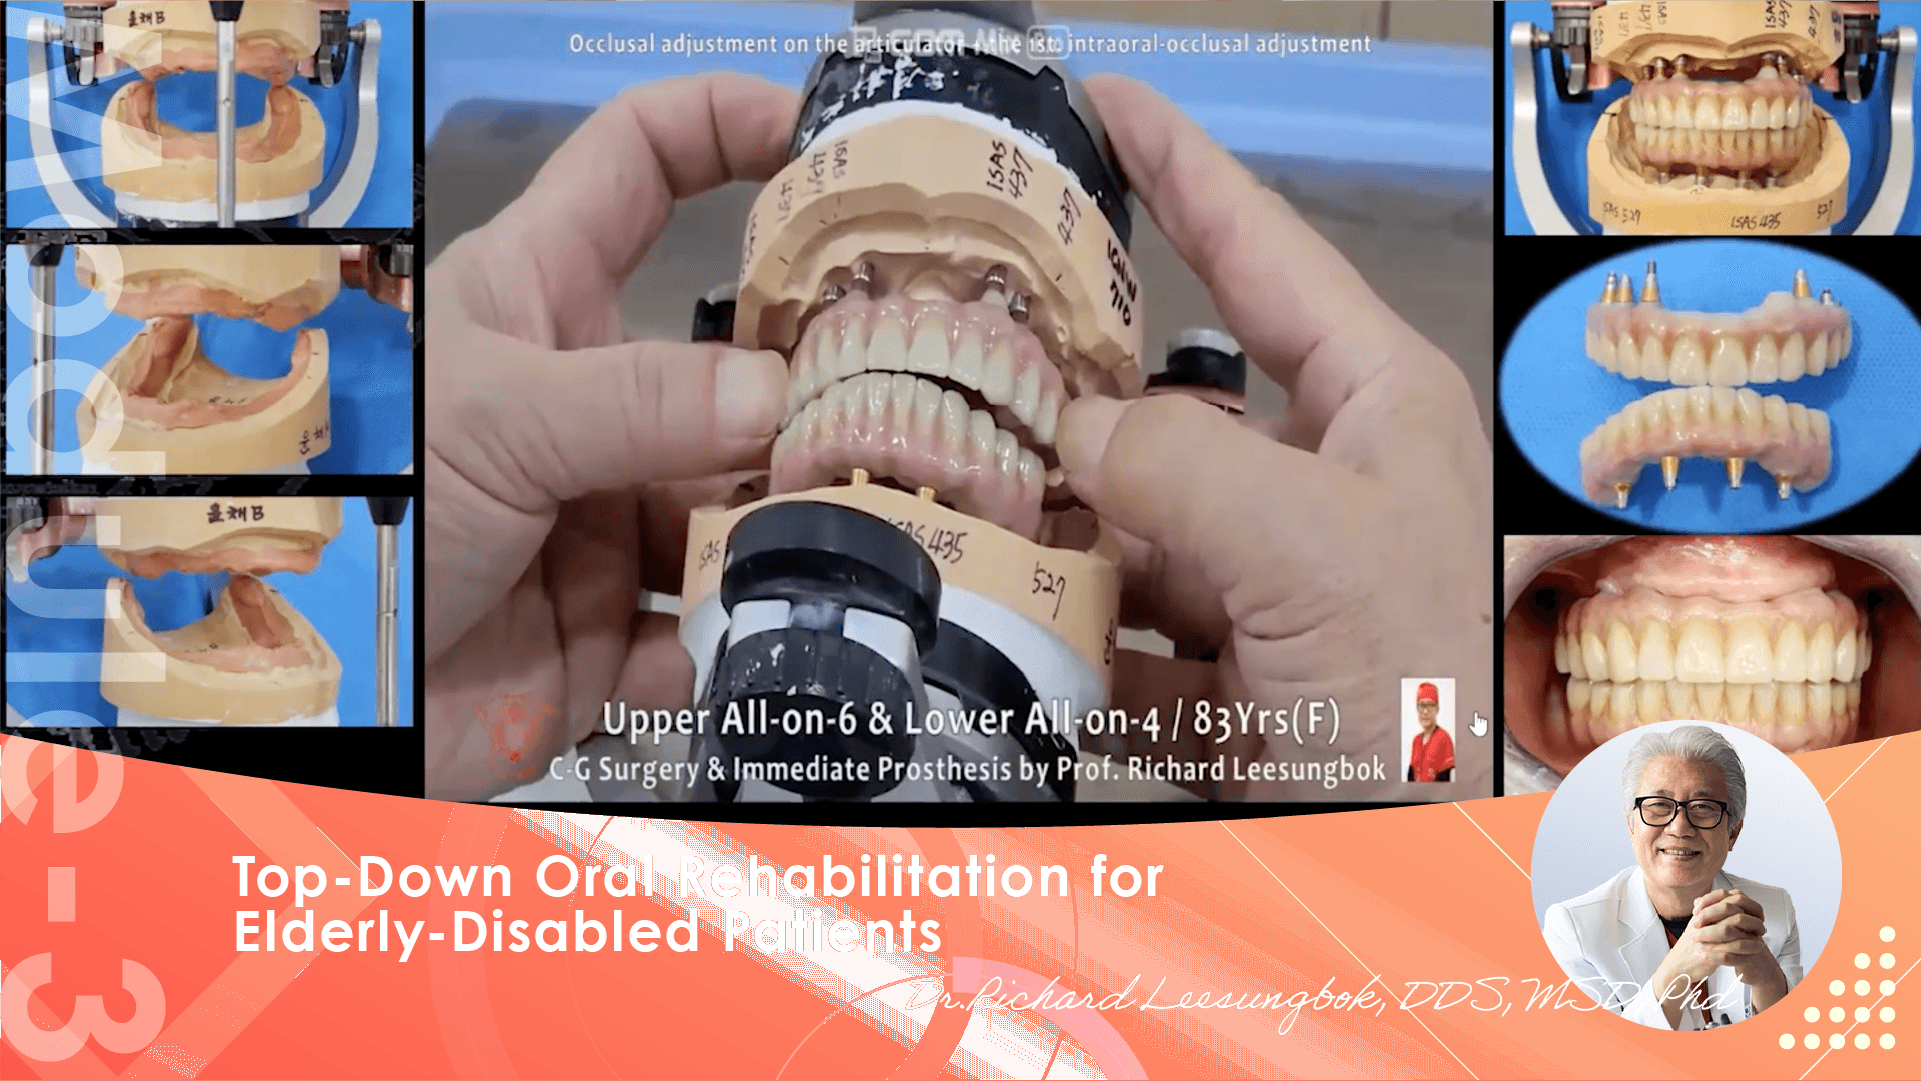 Elderly edentulous transition from Complete Dentures to Fixed hybrid prostheses, Mutually Protected Occlusion for Fixed Prostheses and Considerations